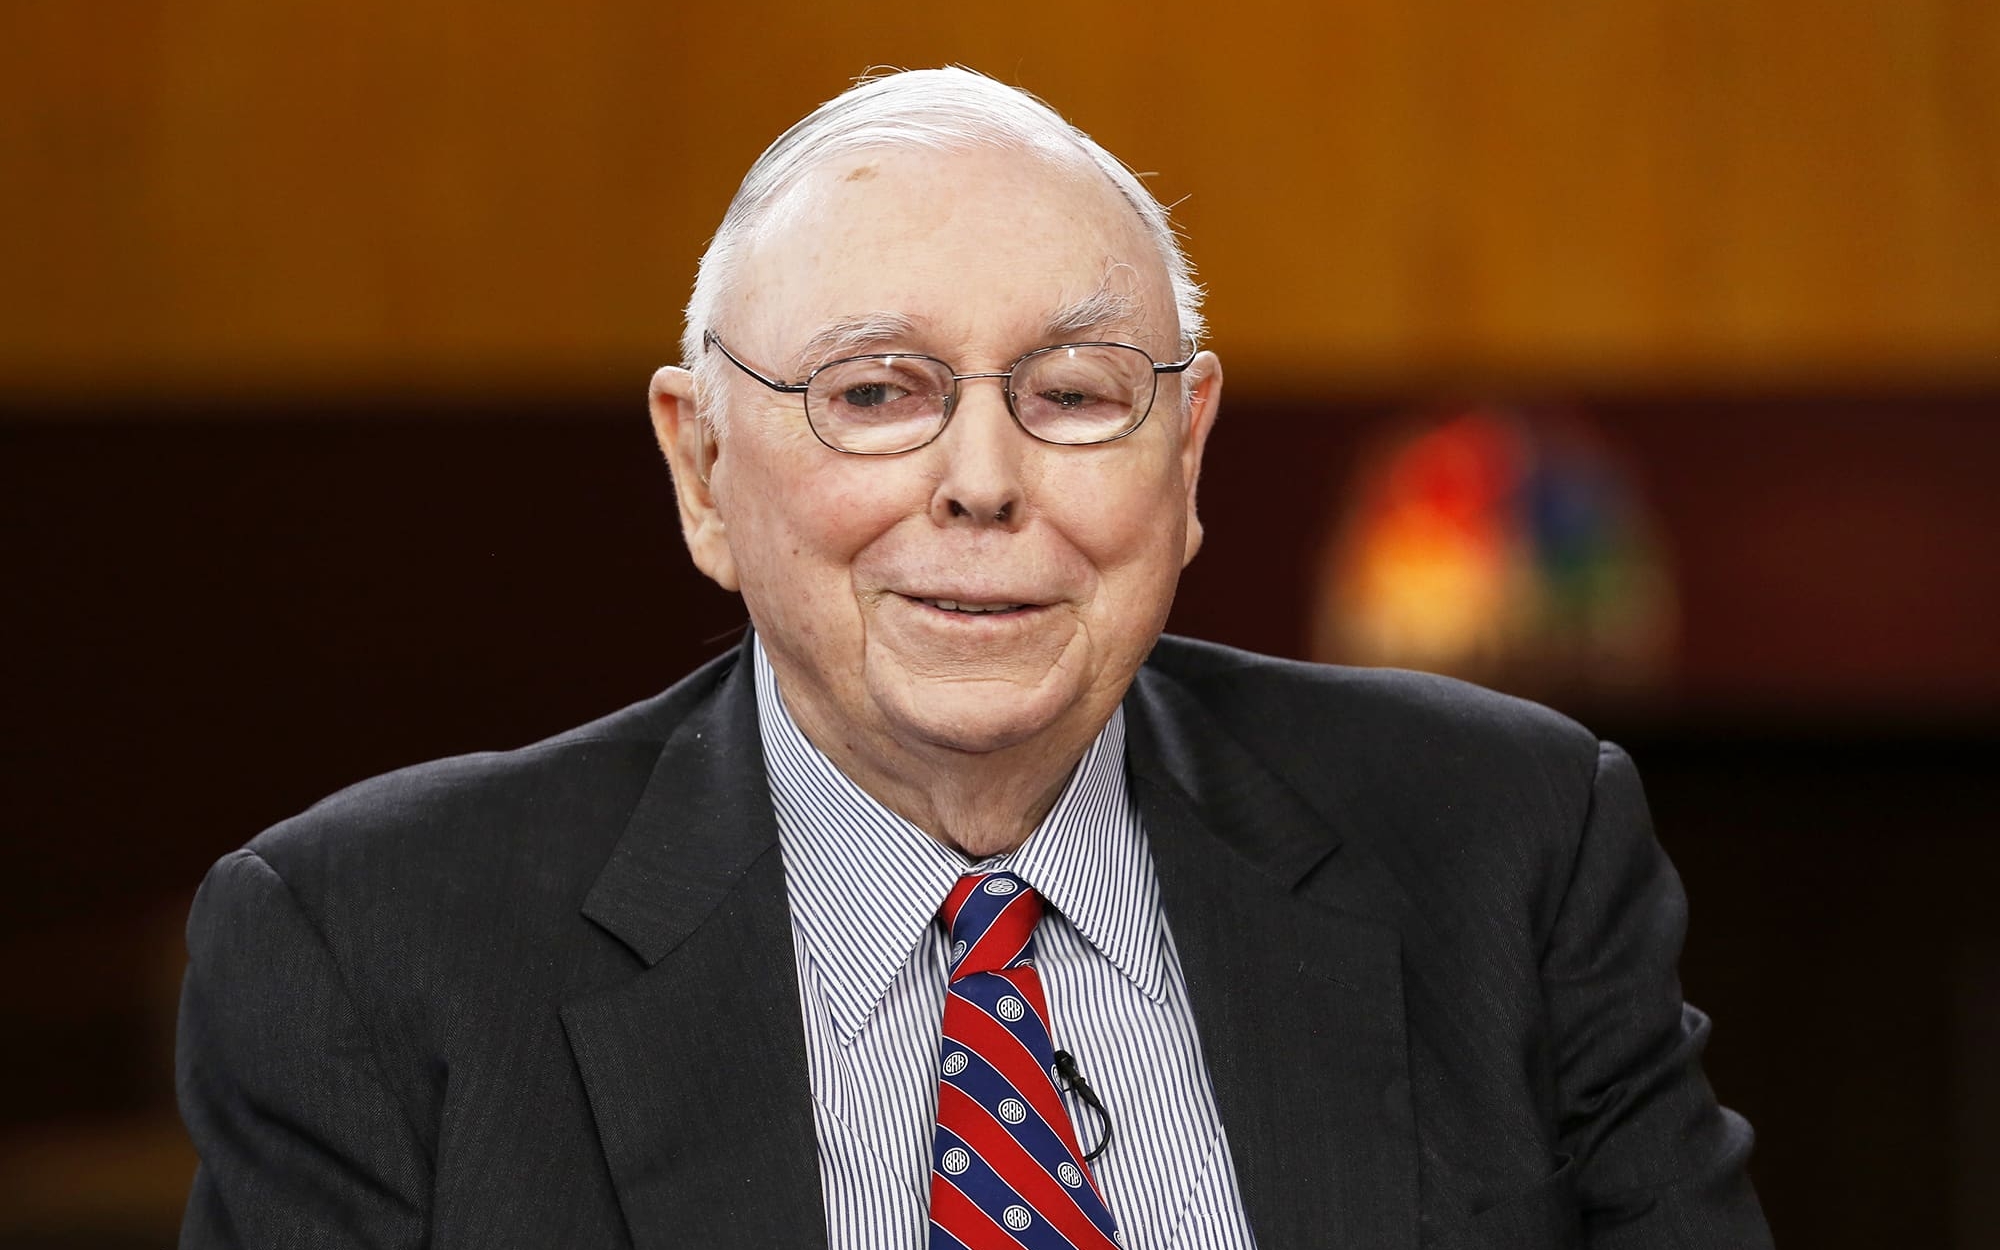 A photo of Berkshire Hathway’s Vice Chairman, Charlie Munger, captured with a smile. 

Image Source: CNBC 